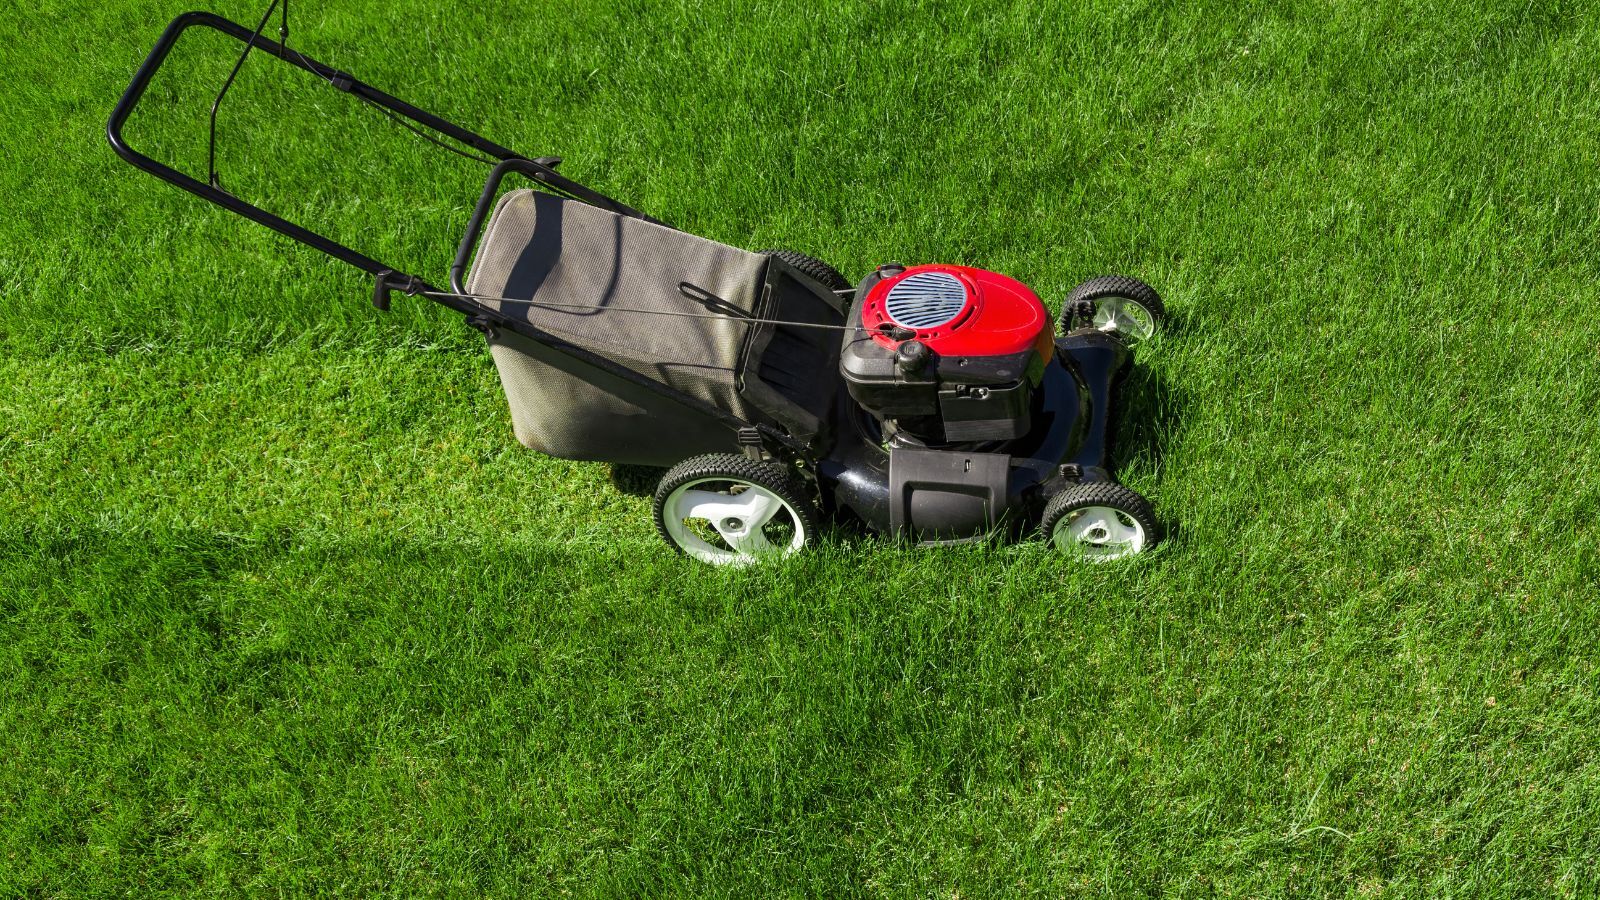 How Do You Start A Lawn Mower? (Steps and Tips)